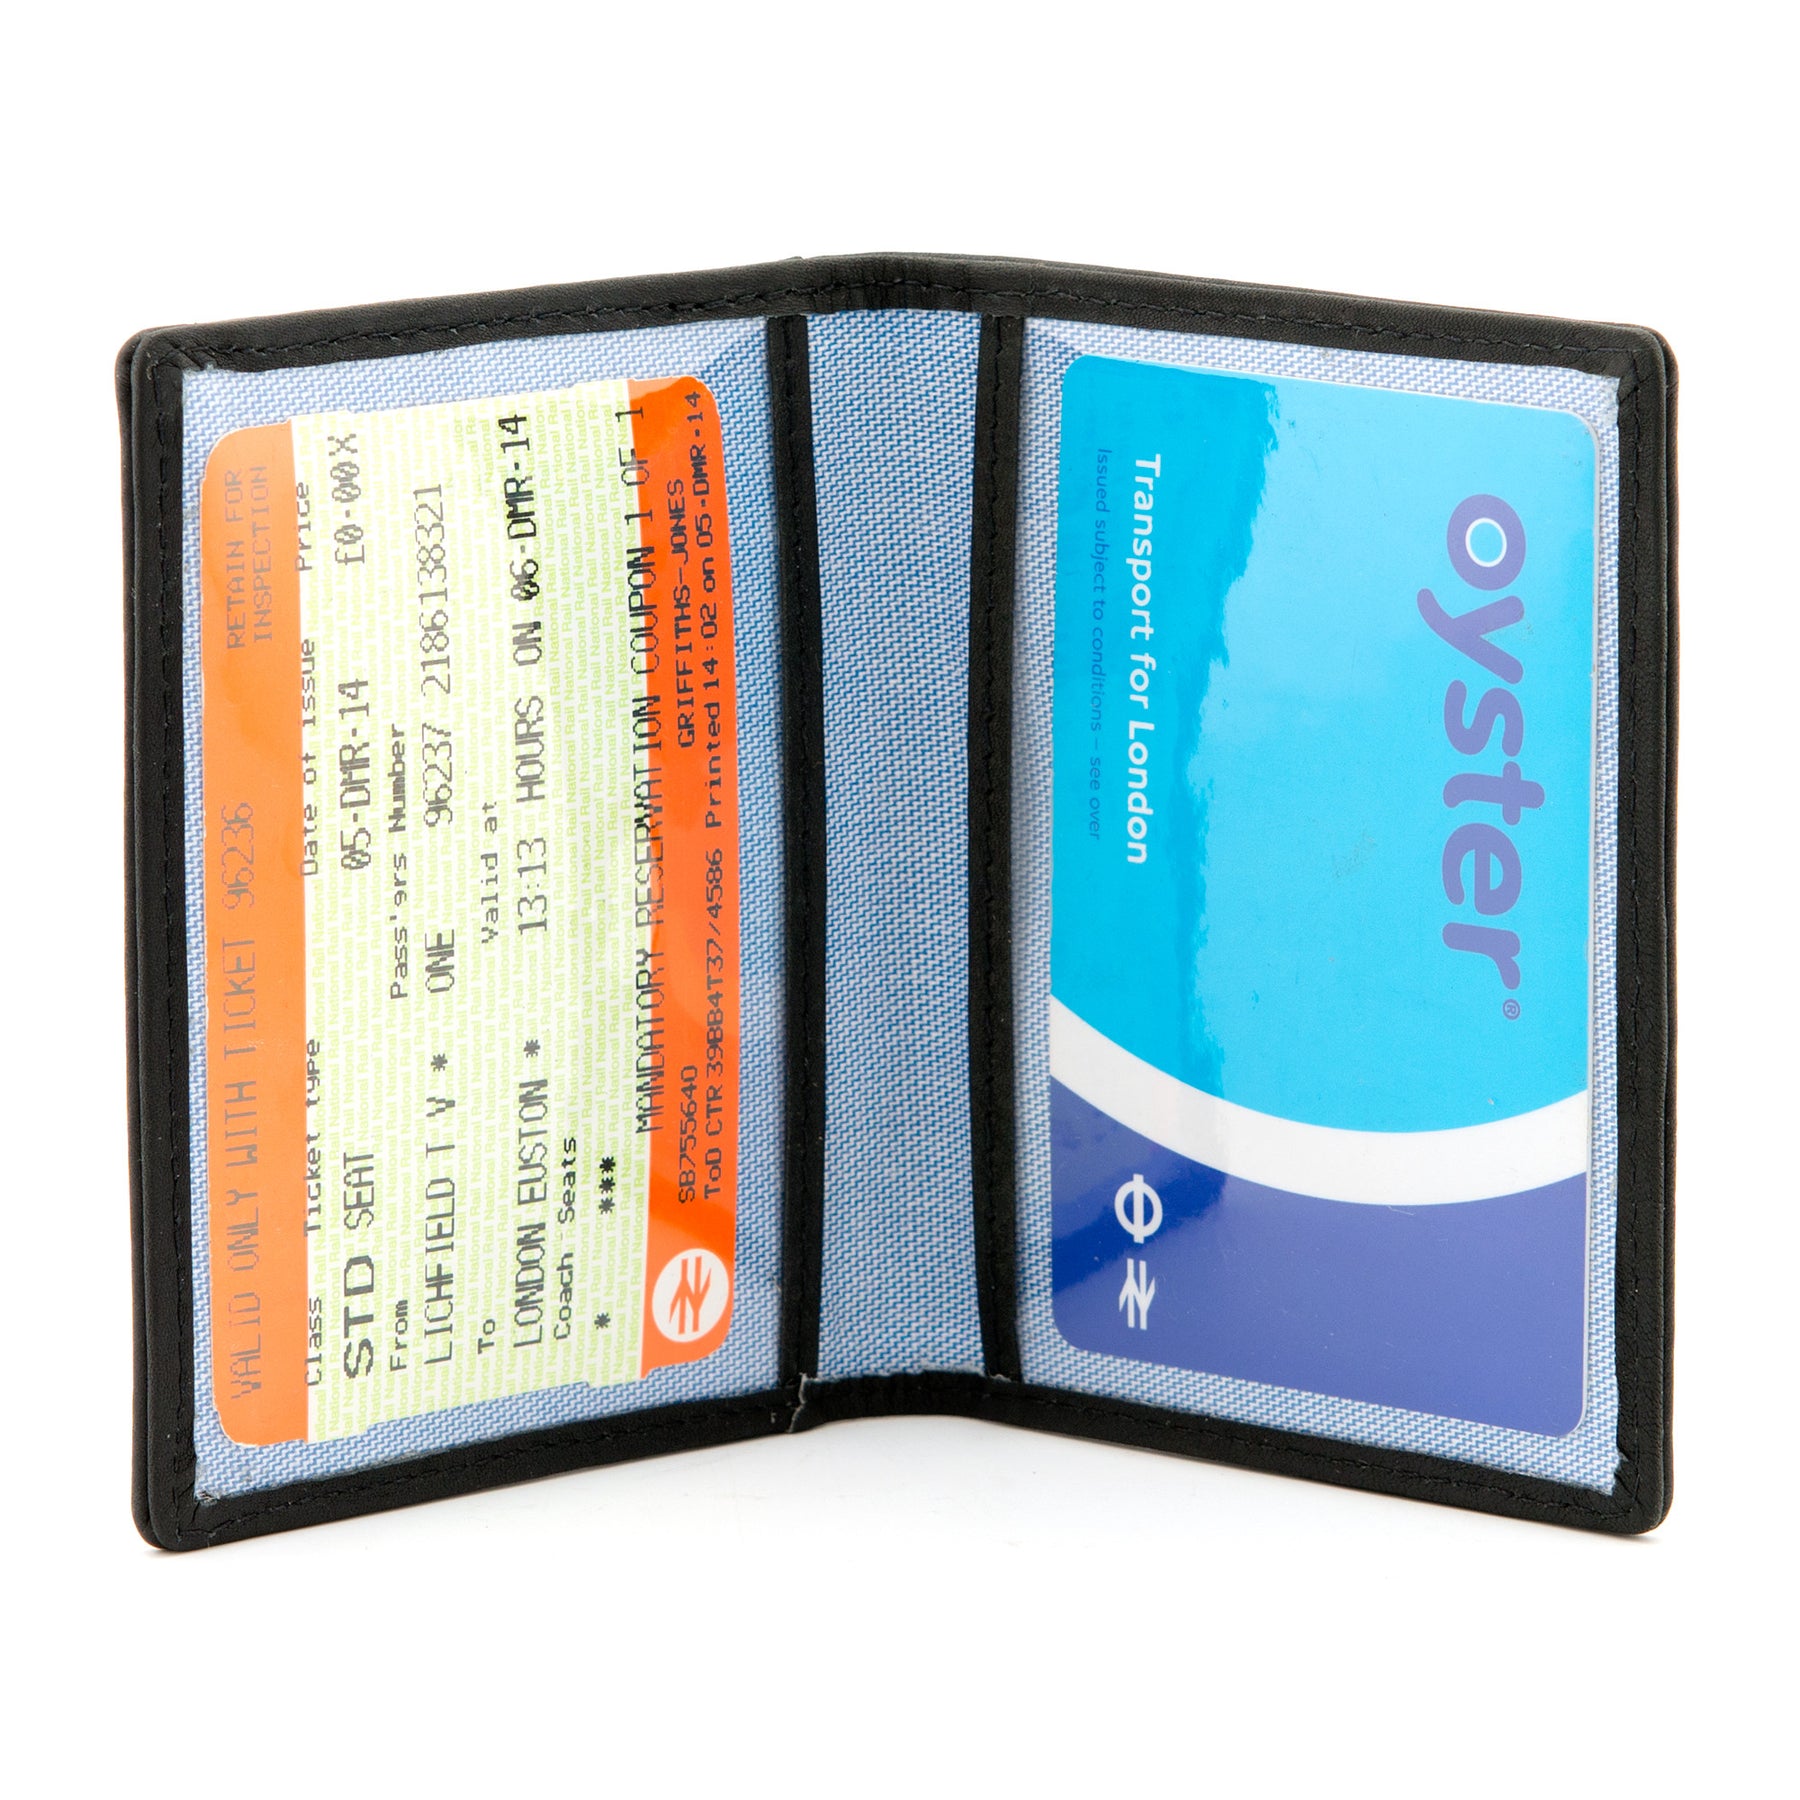 ONE BEST DEAL Soft Leather Travel Card Oyster Bus Pass Credit Card